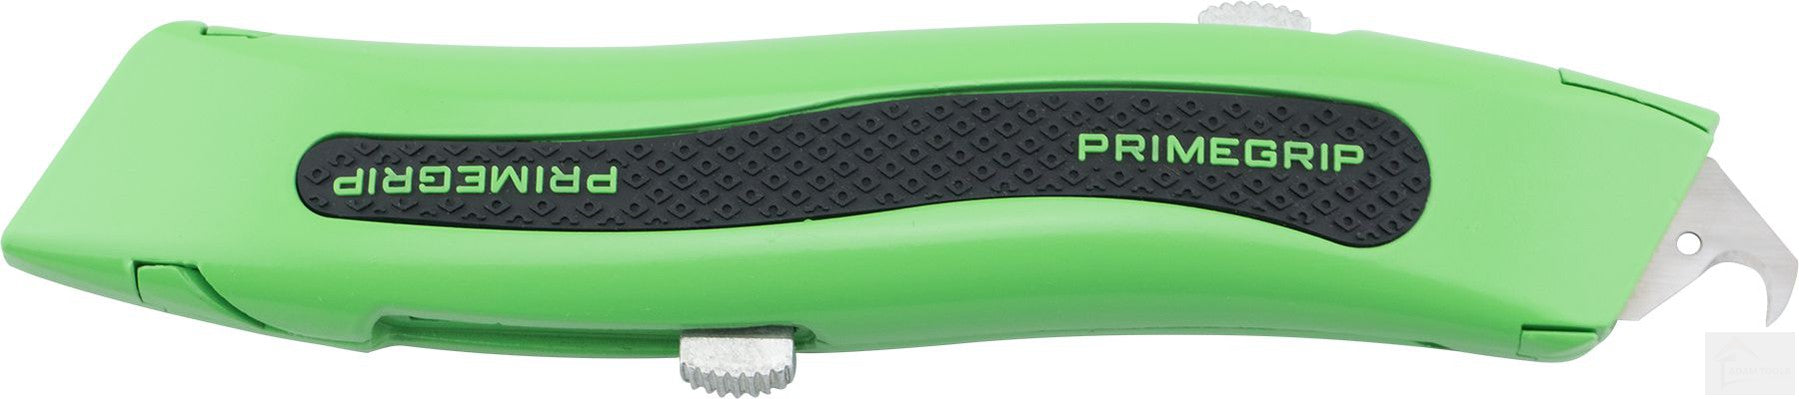 PRIMEGRIP Dual Blade Roofing Knife [36-291]